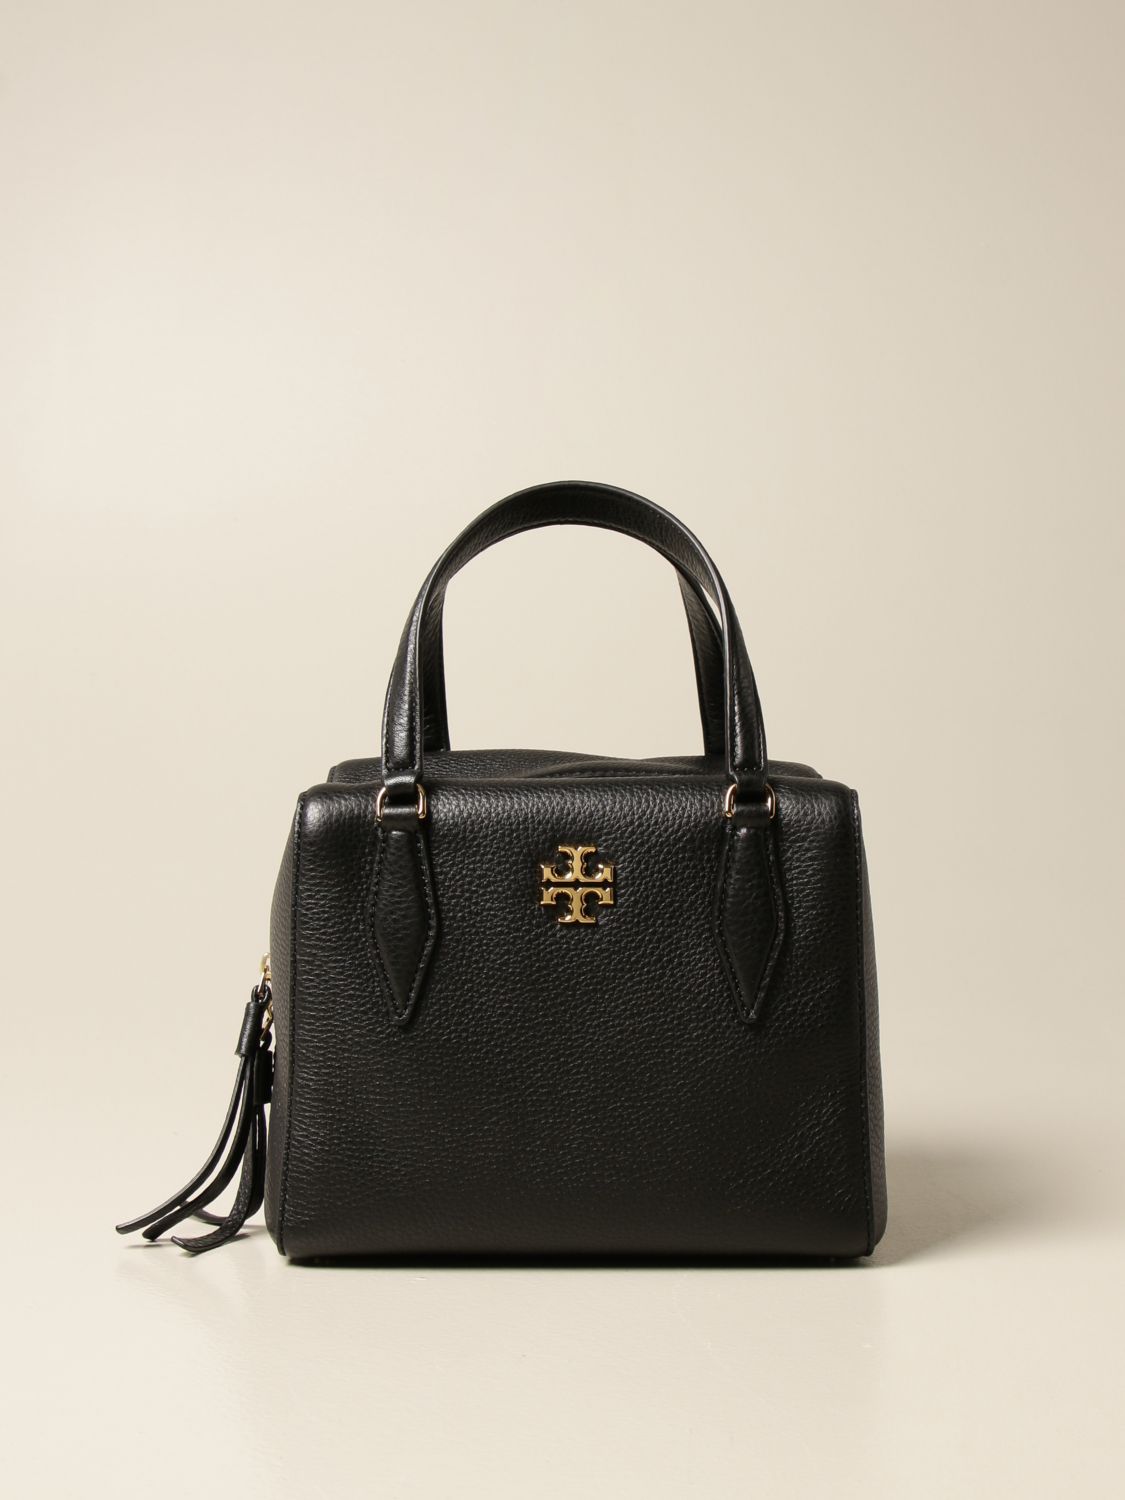 TORY BURCH: Kira Pebbled bag in textured leather - Black